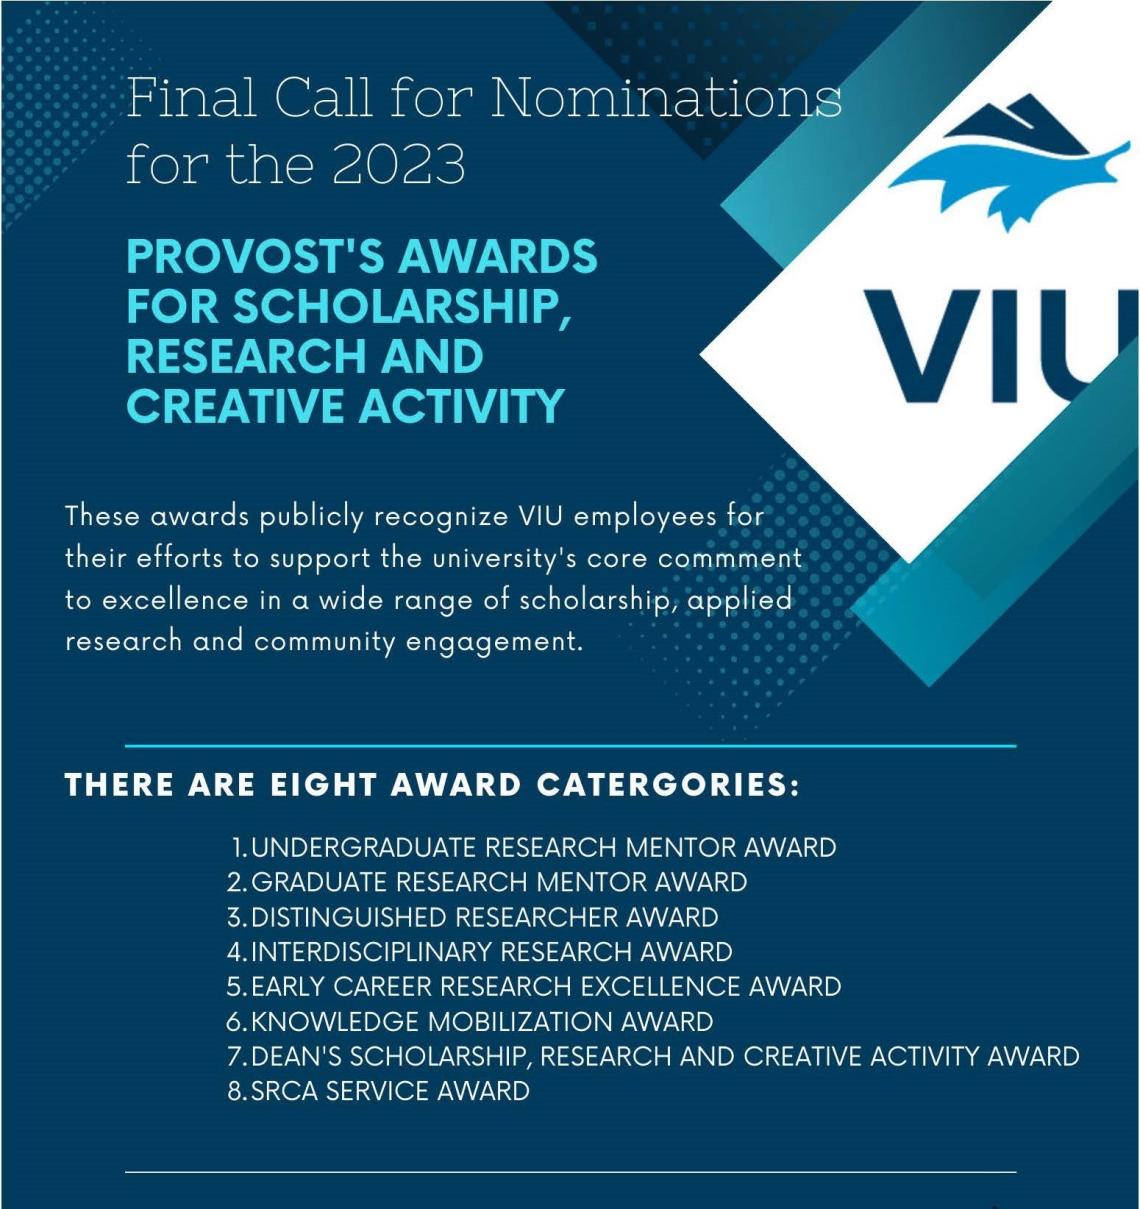 Final Call for Nominations